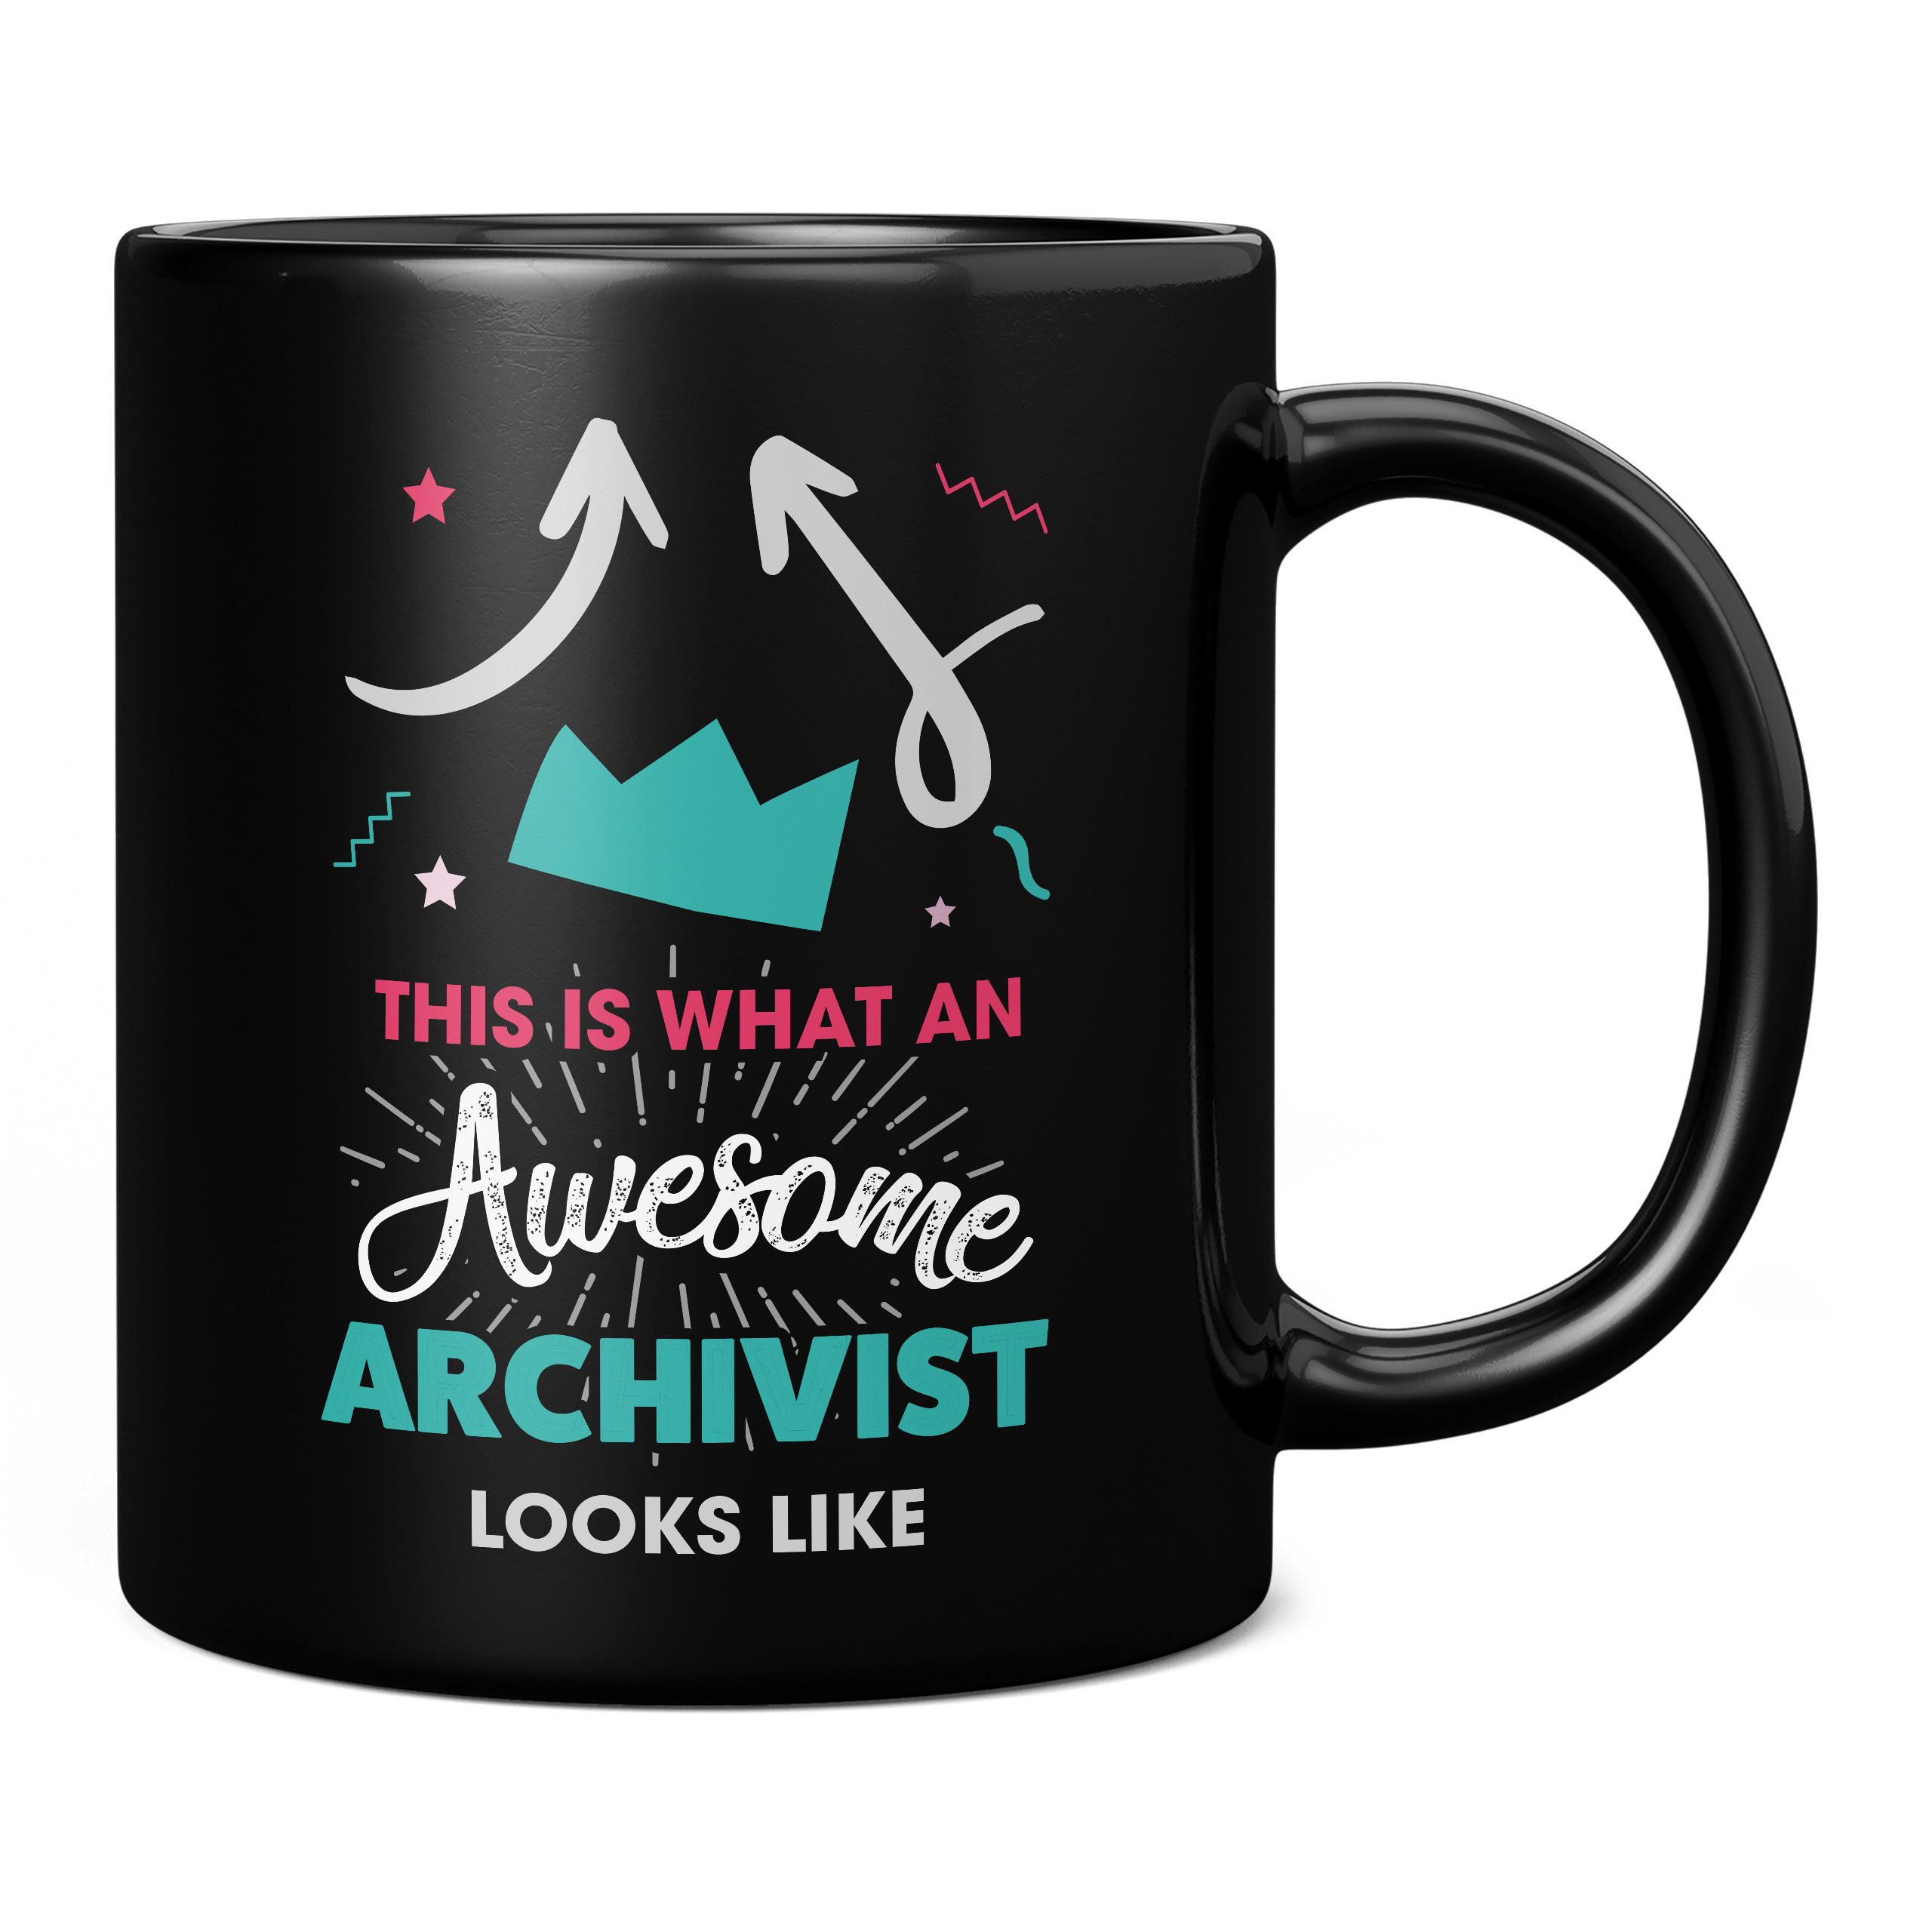 THIS IS WHAT AN AWESOME ARCHIVIST LOOKS LIKE 11OZ NOVELTY MUG